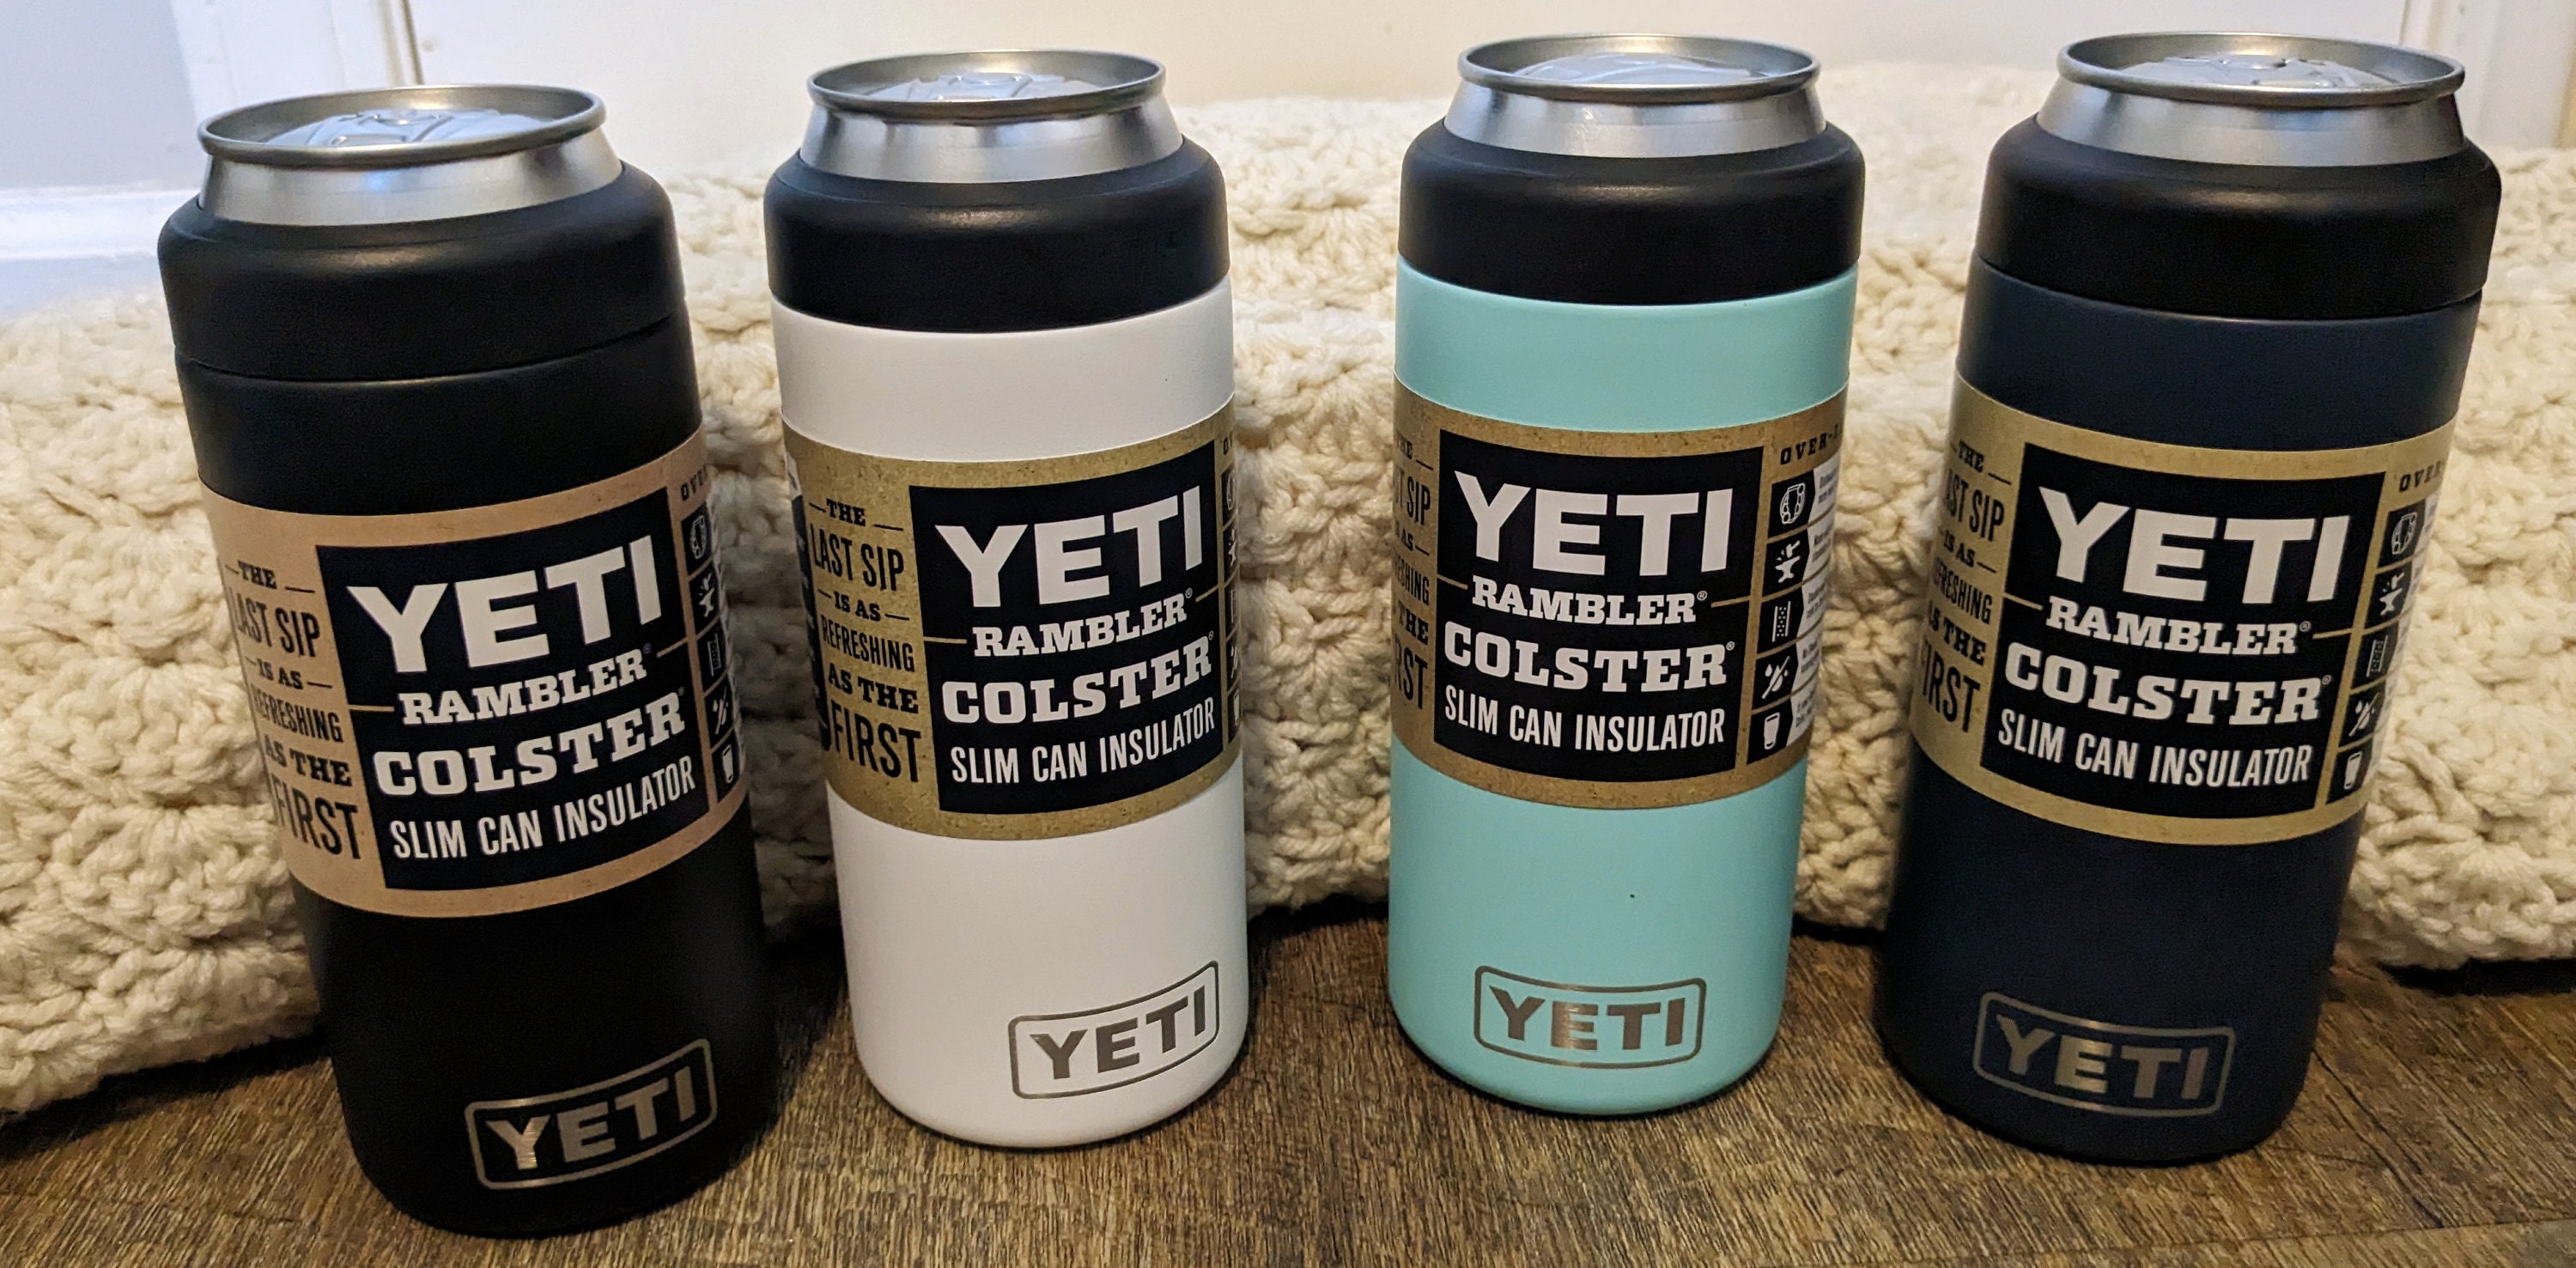  YETI Rambler 12 oz. Colster Slim Can Insulator for the Slim  Hard Seltzer Cans, Navy: Home & Kitchen